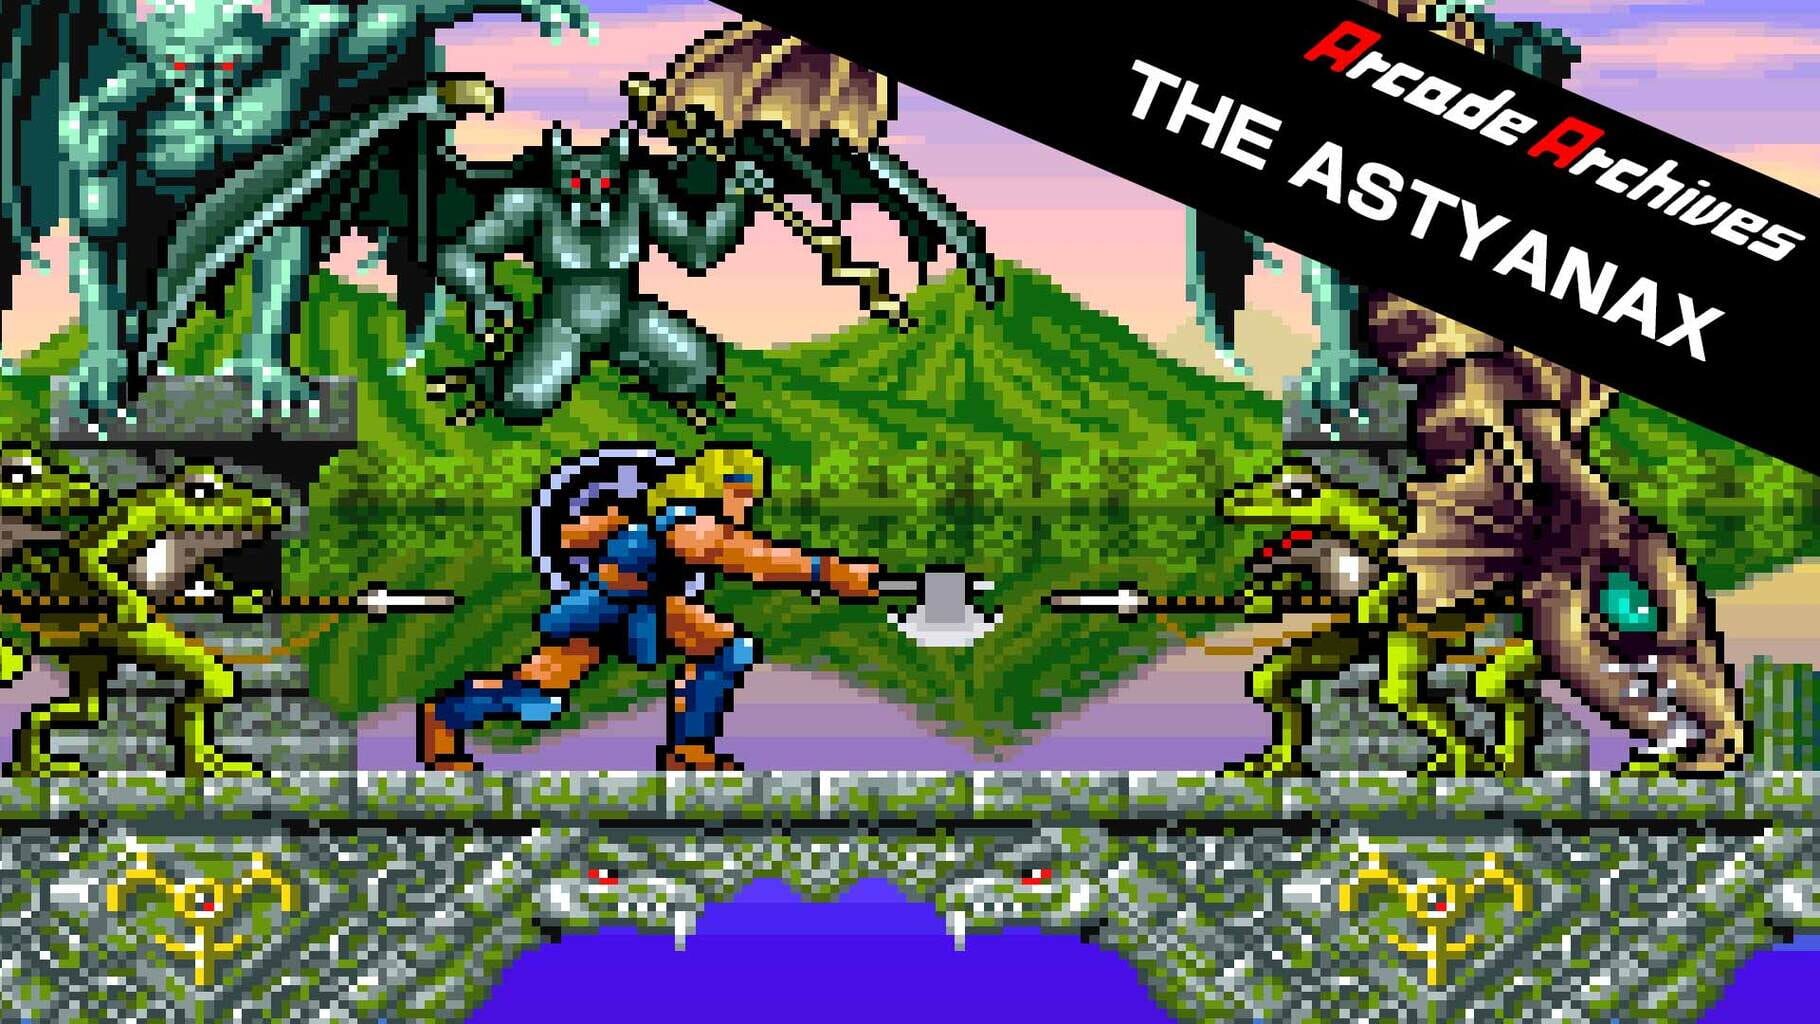 Arcade Archives: The Astyanax artwork